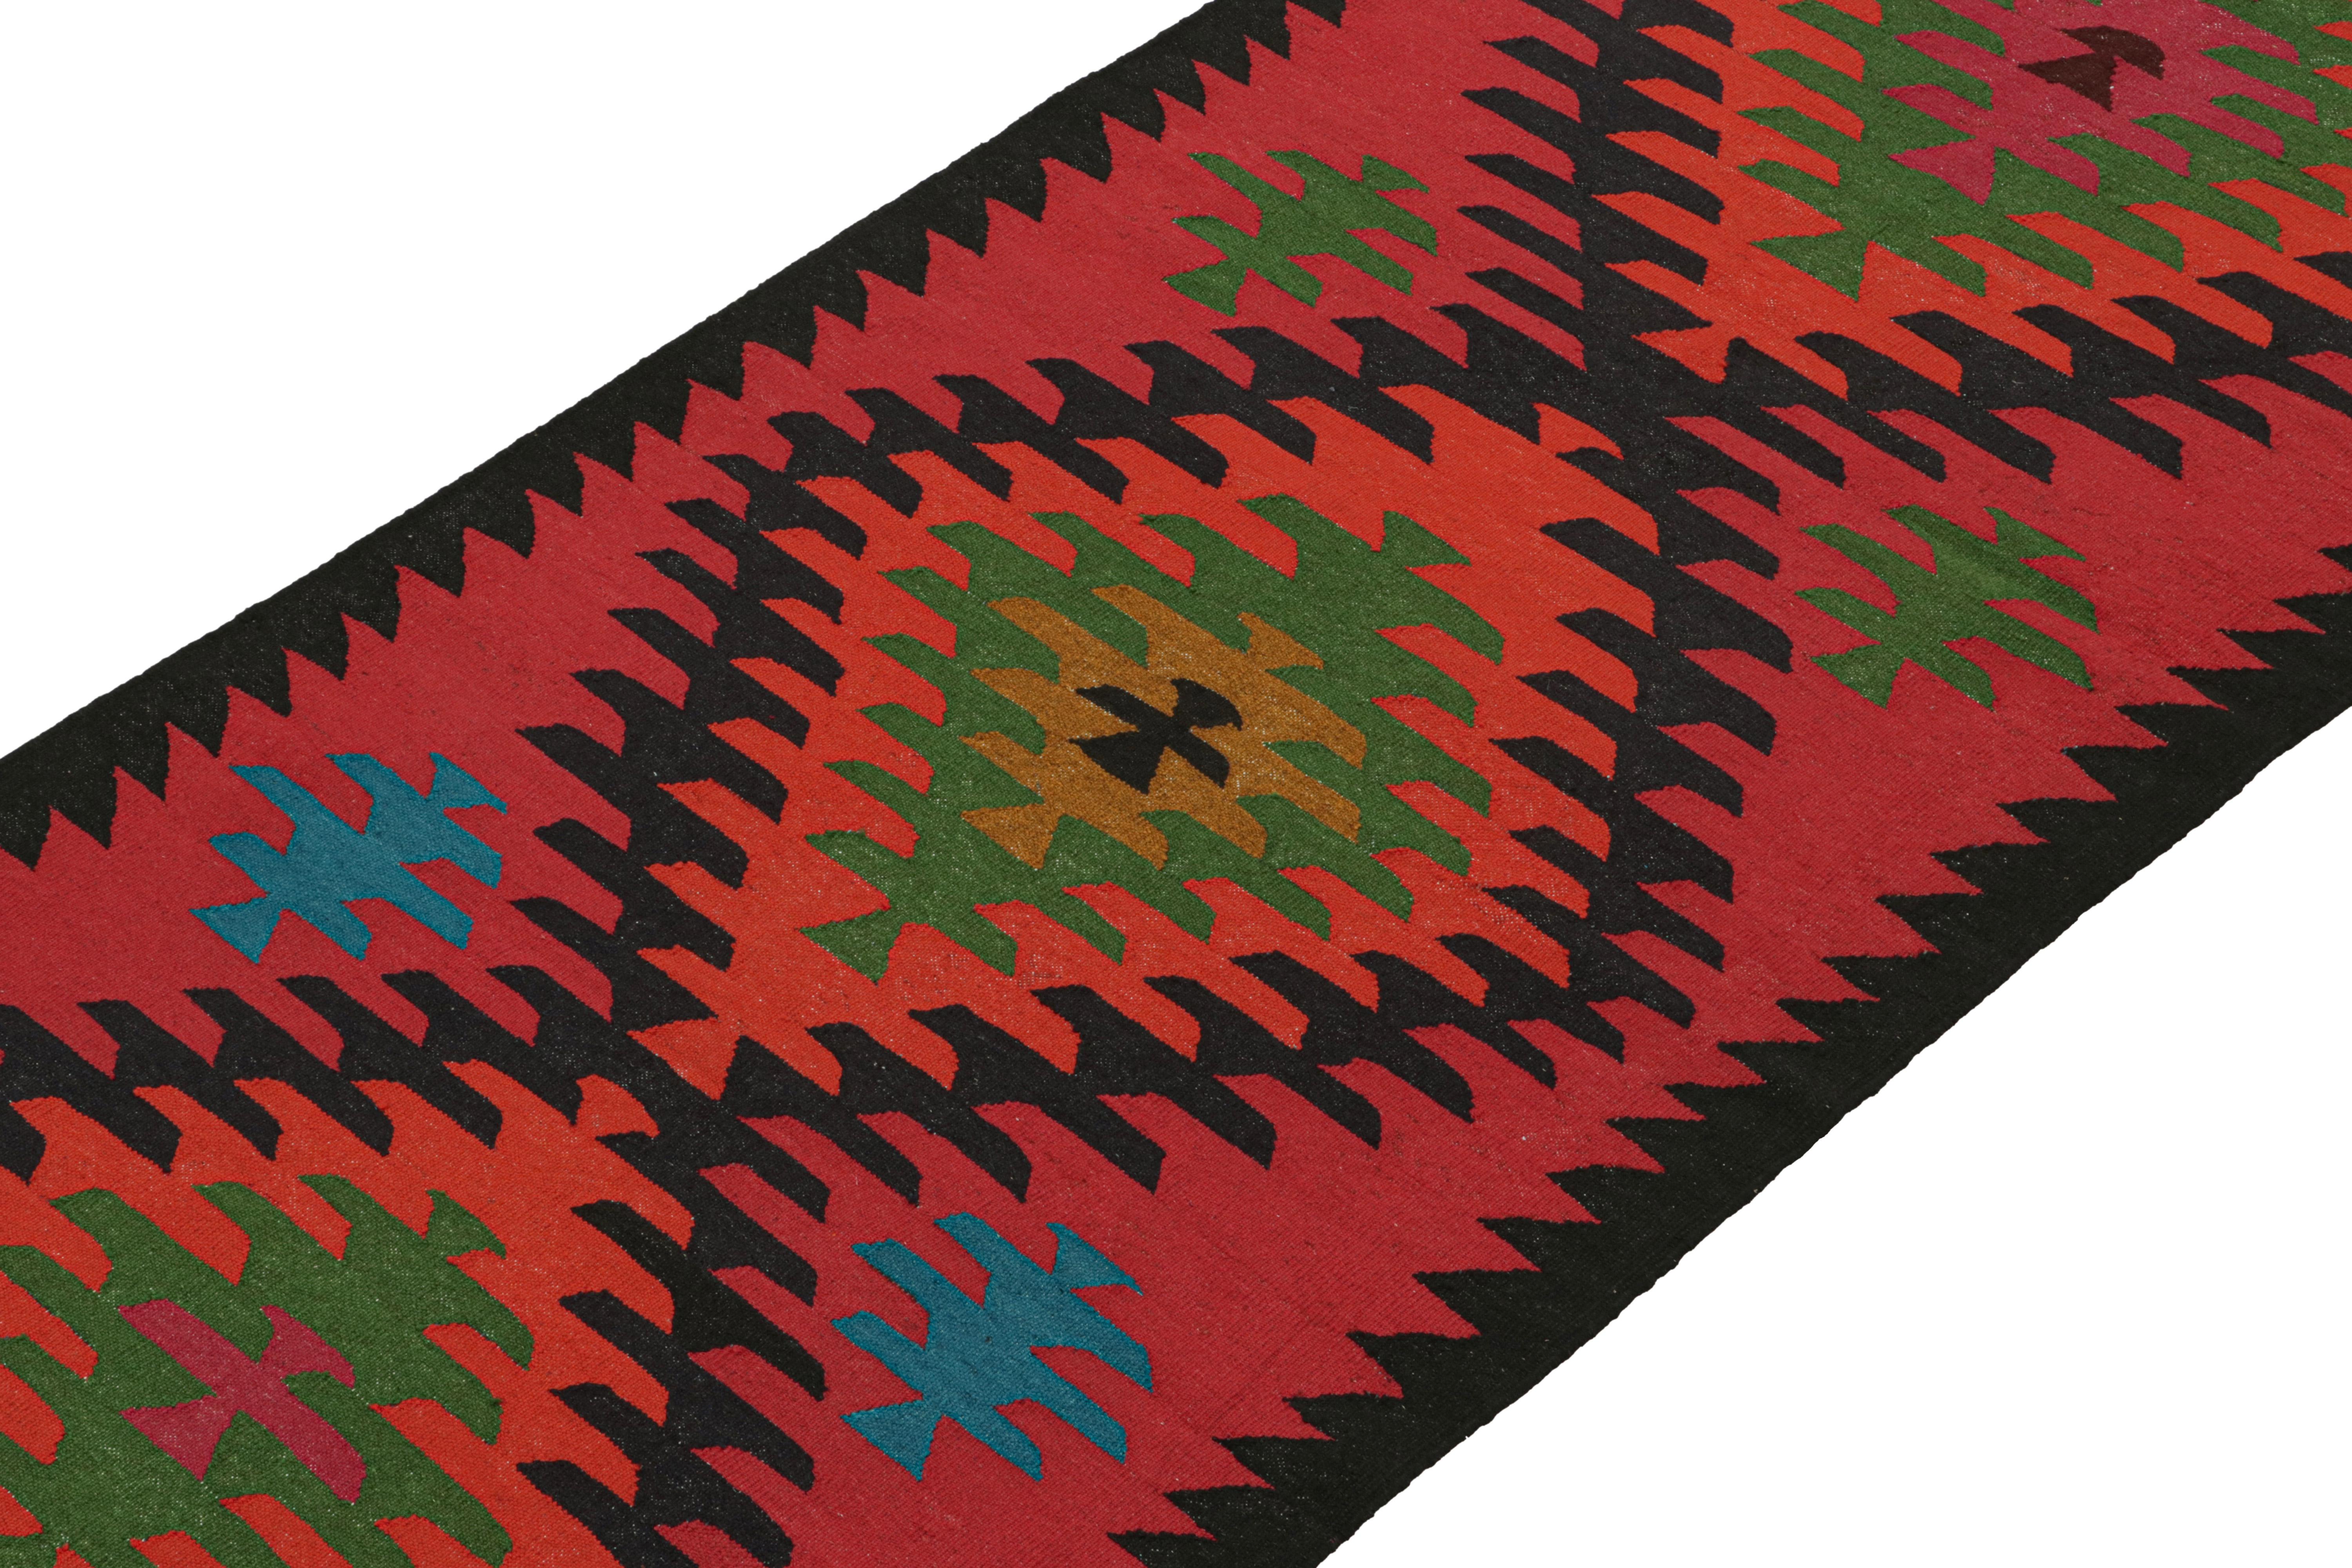 This vintage 4x9 Persian Kilim is a tribal rug from Meshkin—a small northwestern village known for its fabulous works. Handwoven in wool, it originates circa 1950-1960.

On the Design:

The bold design prefers tribal geometric patterns in